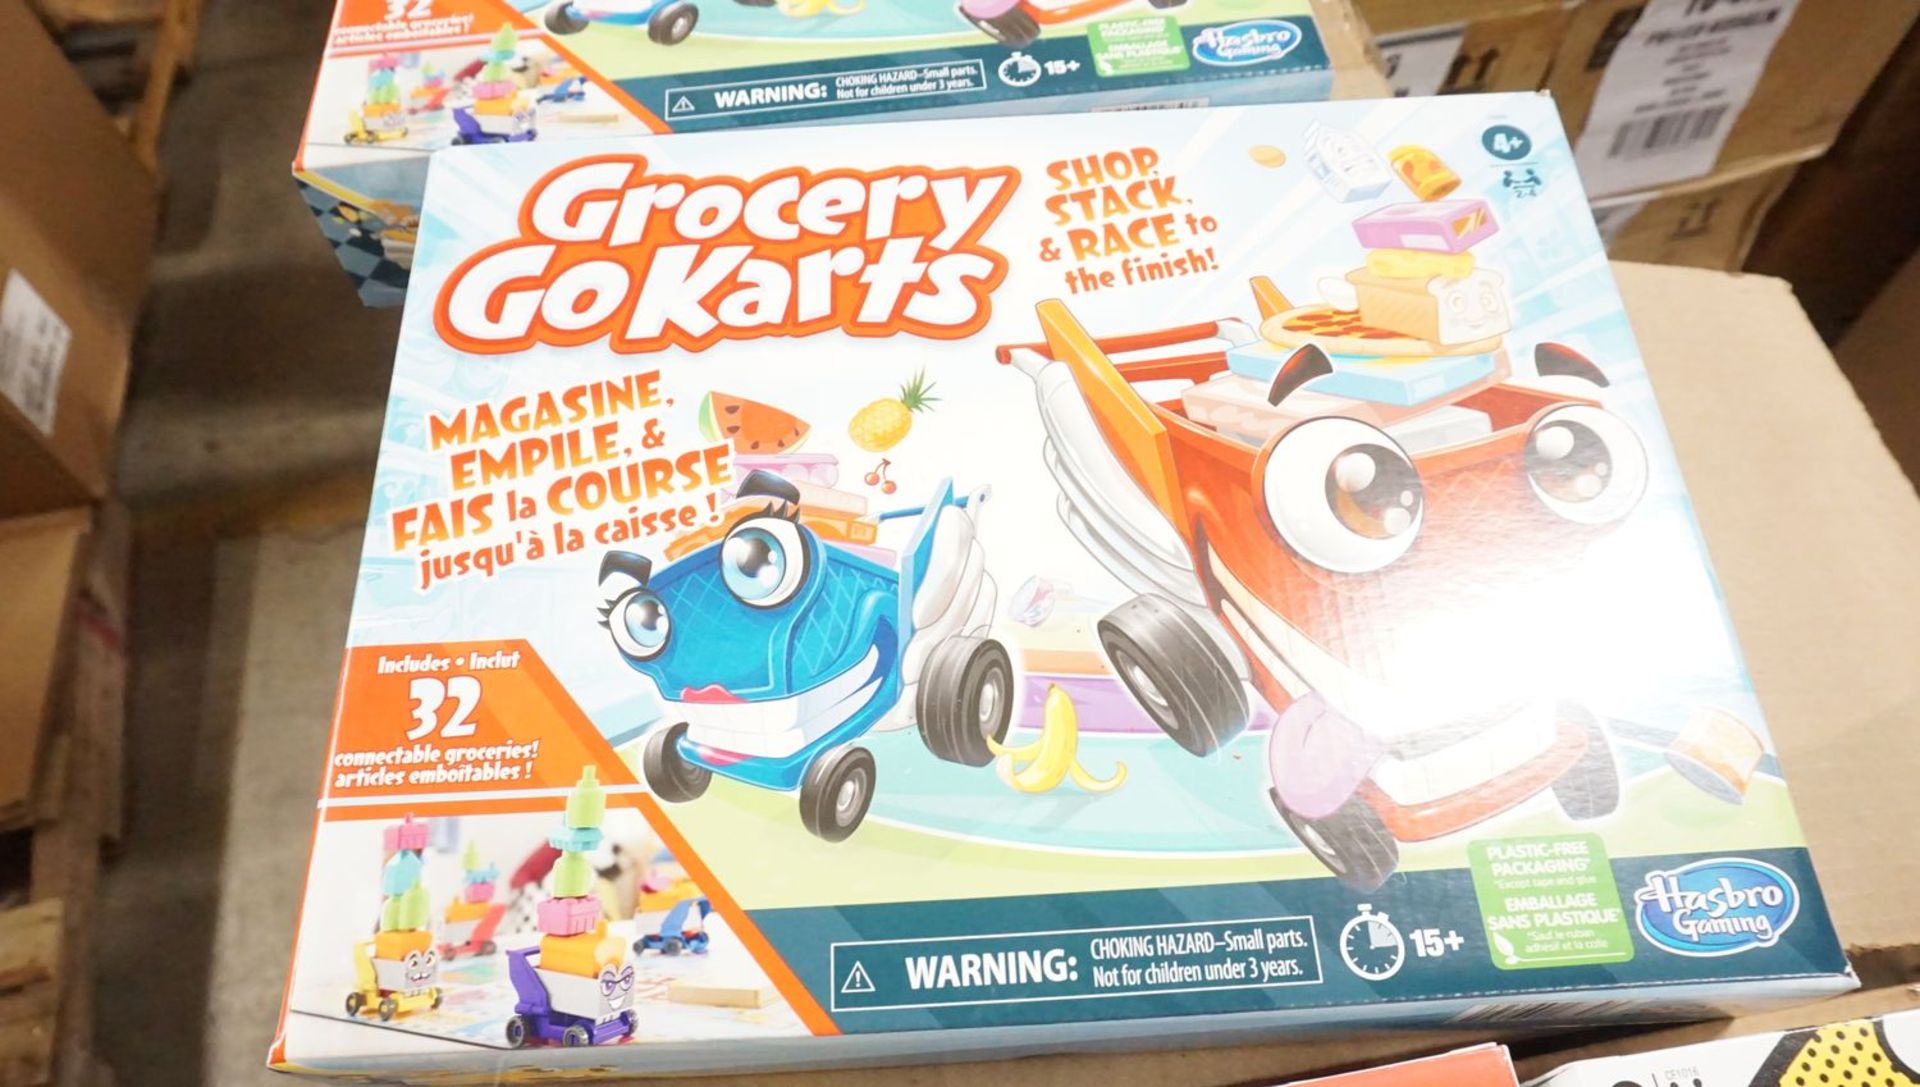 LOT - POP-O-MATIC TROUBLE GAME (30 UNITS) & GROCERY GO KARTS (24 UNITS) - Image 2 of 3